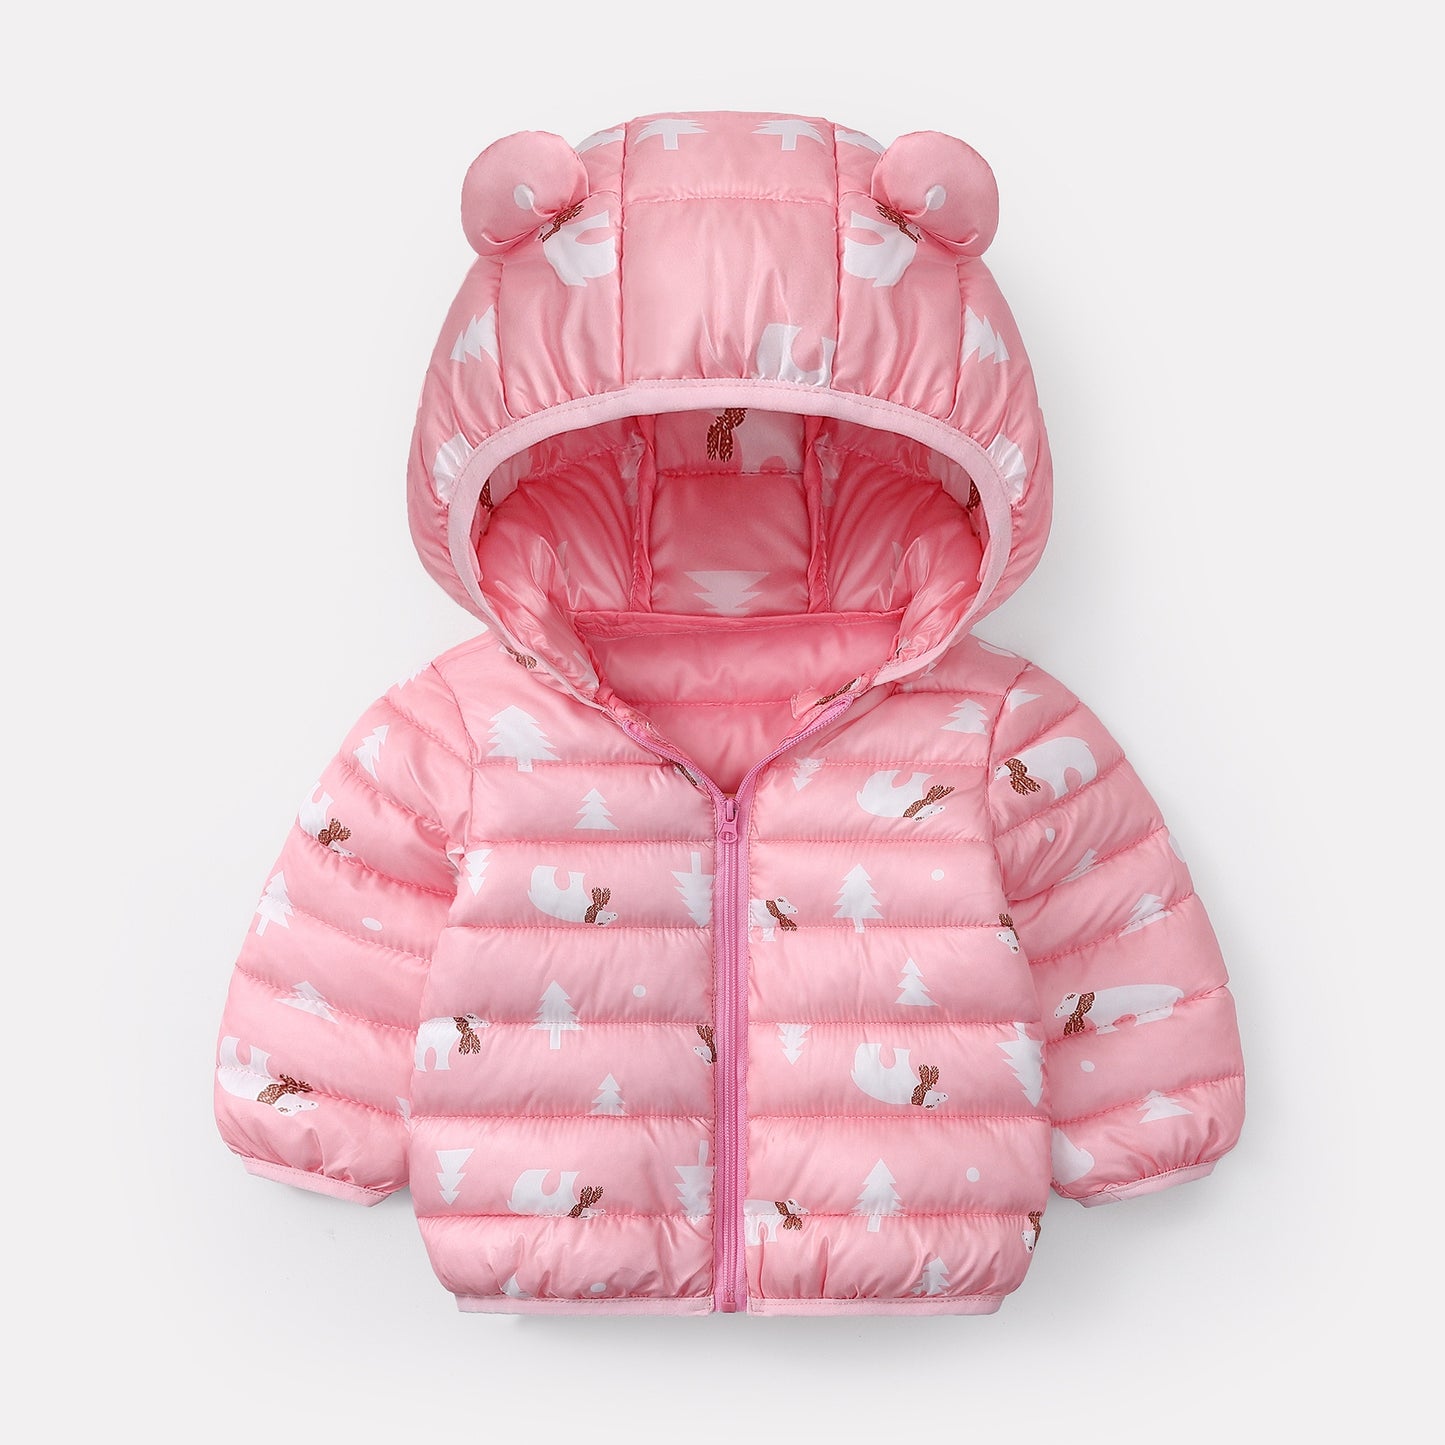 The Mum Shop Au- Baby/Toddler/Kids Warm Winter Hooded Down Jacket with Ears -Available in sizes 1Y-5Years-Multiple colors to choose from